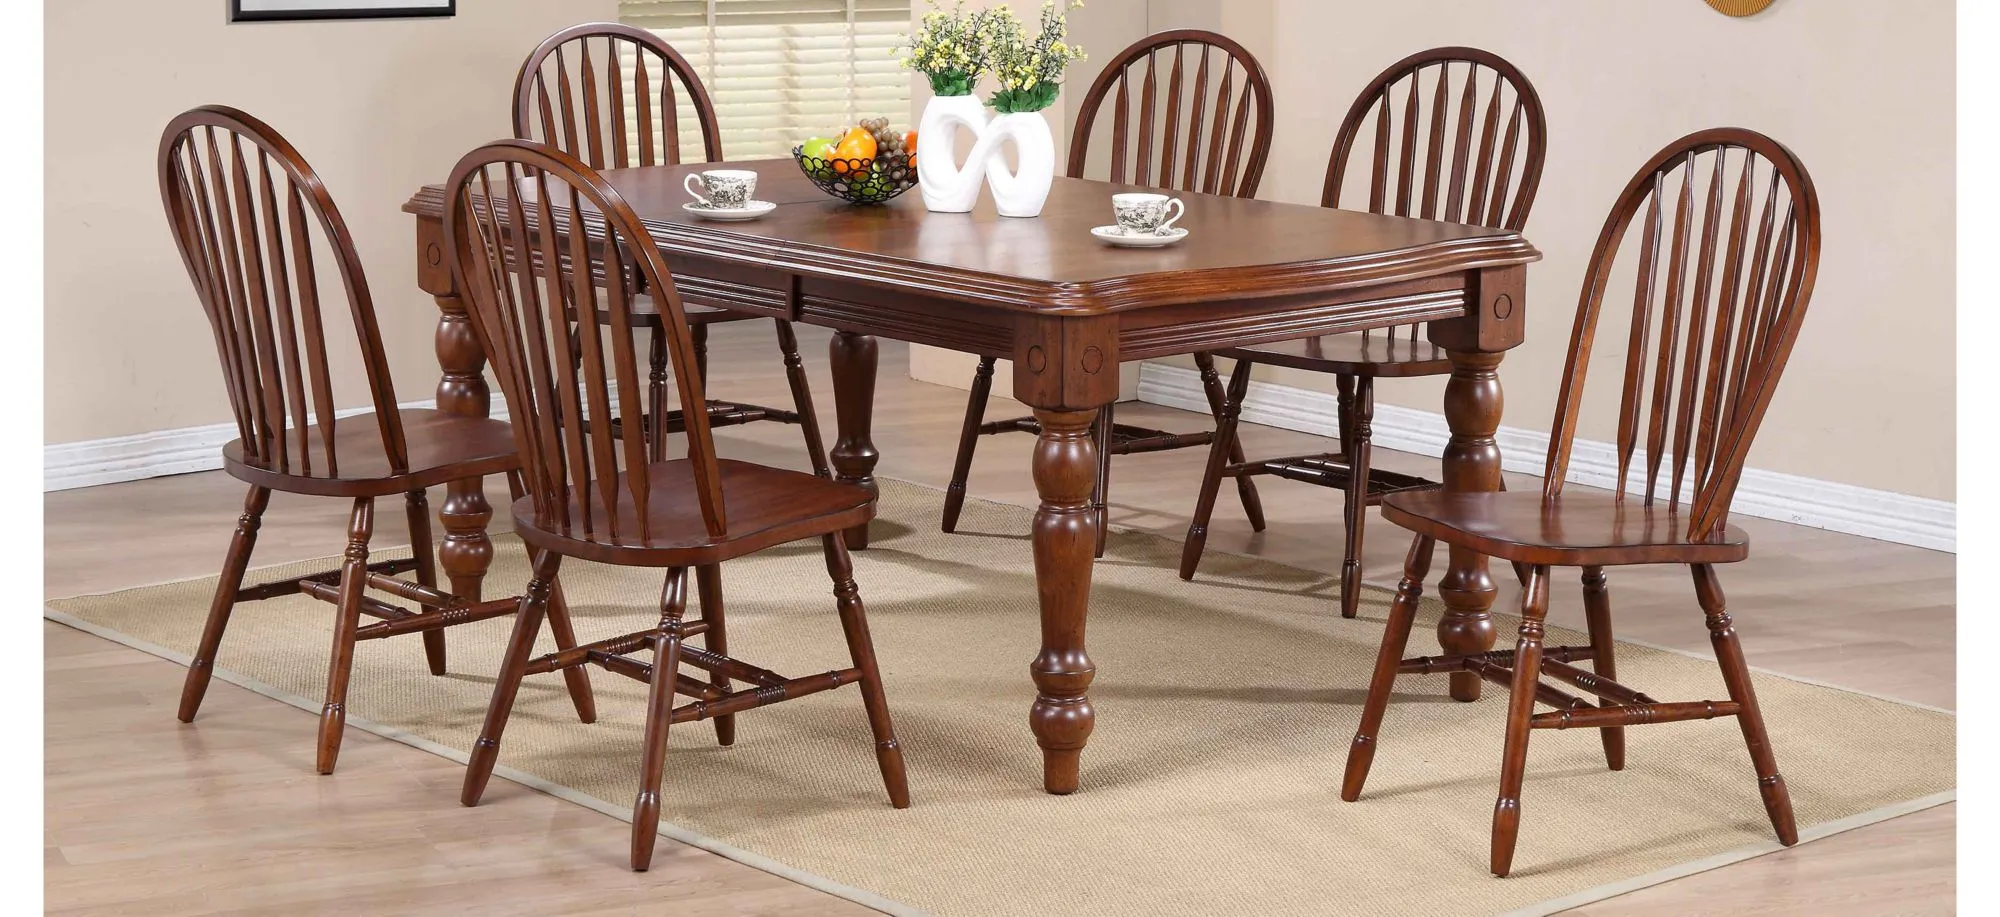 Fenway 7-pc. Dining Set in Chestnut by Sunset Trading